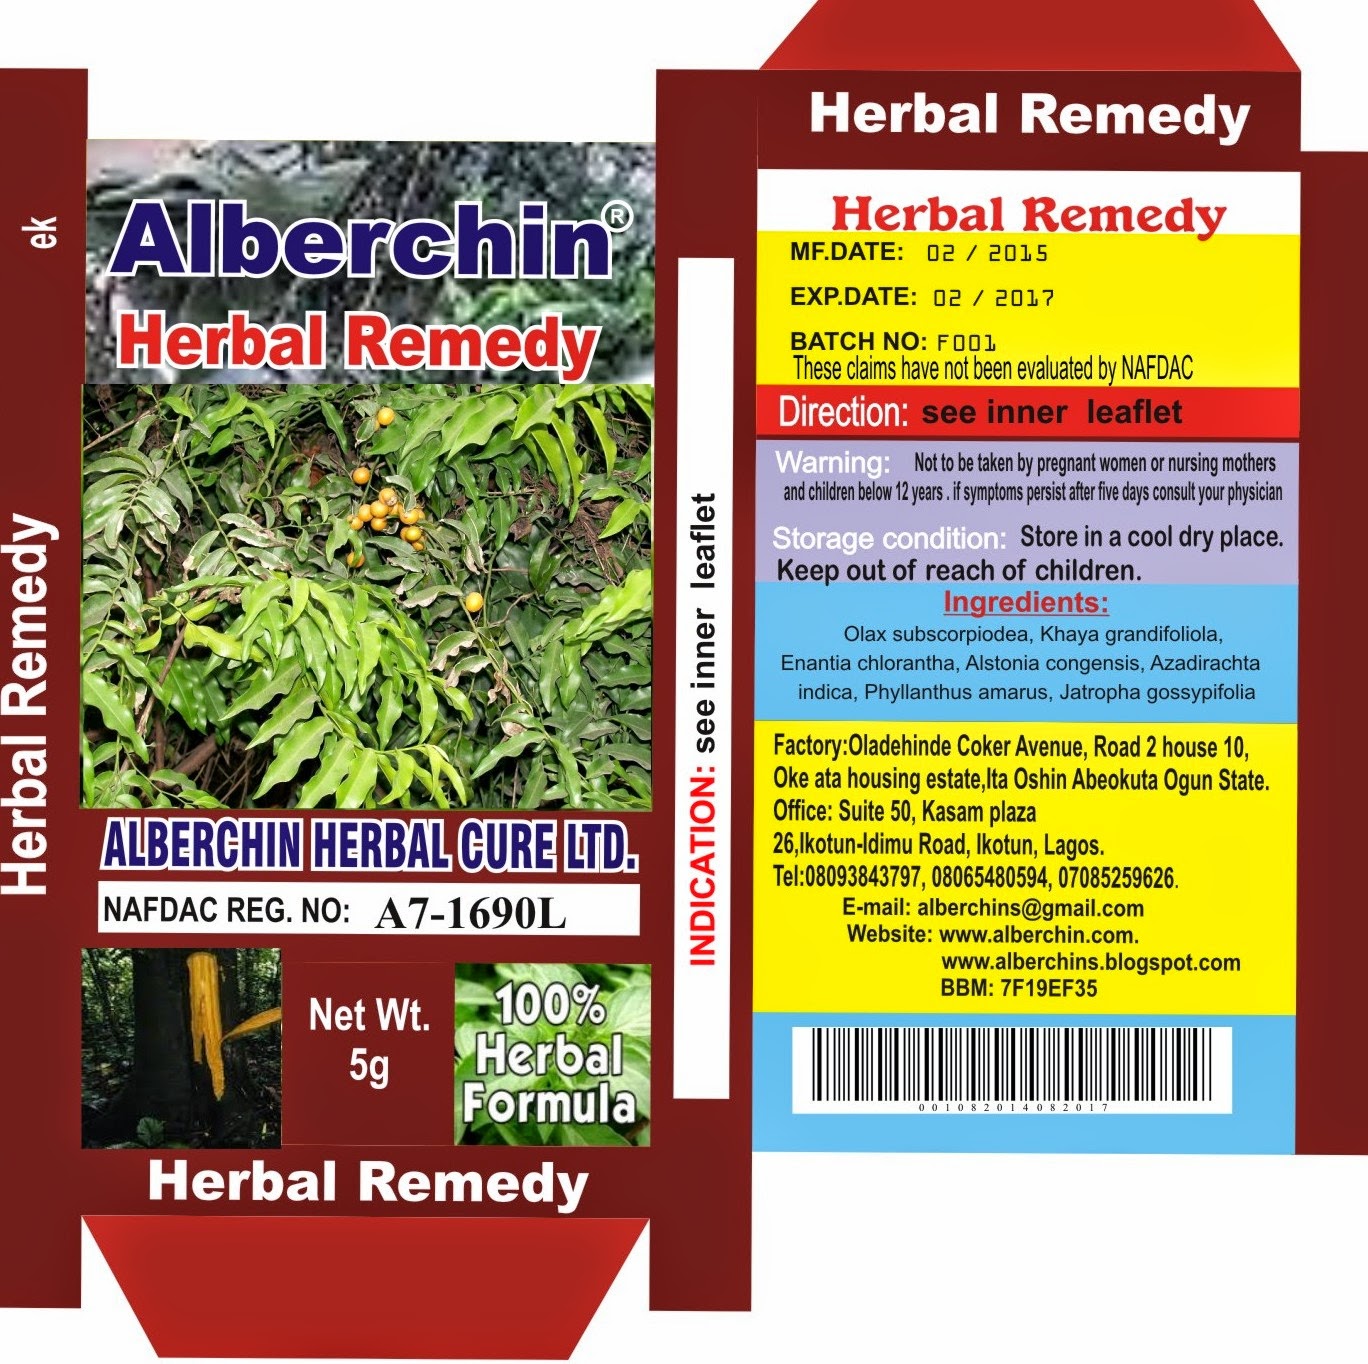 latest from Alberchin herbal products